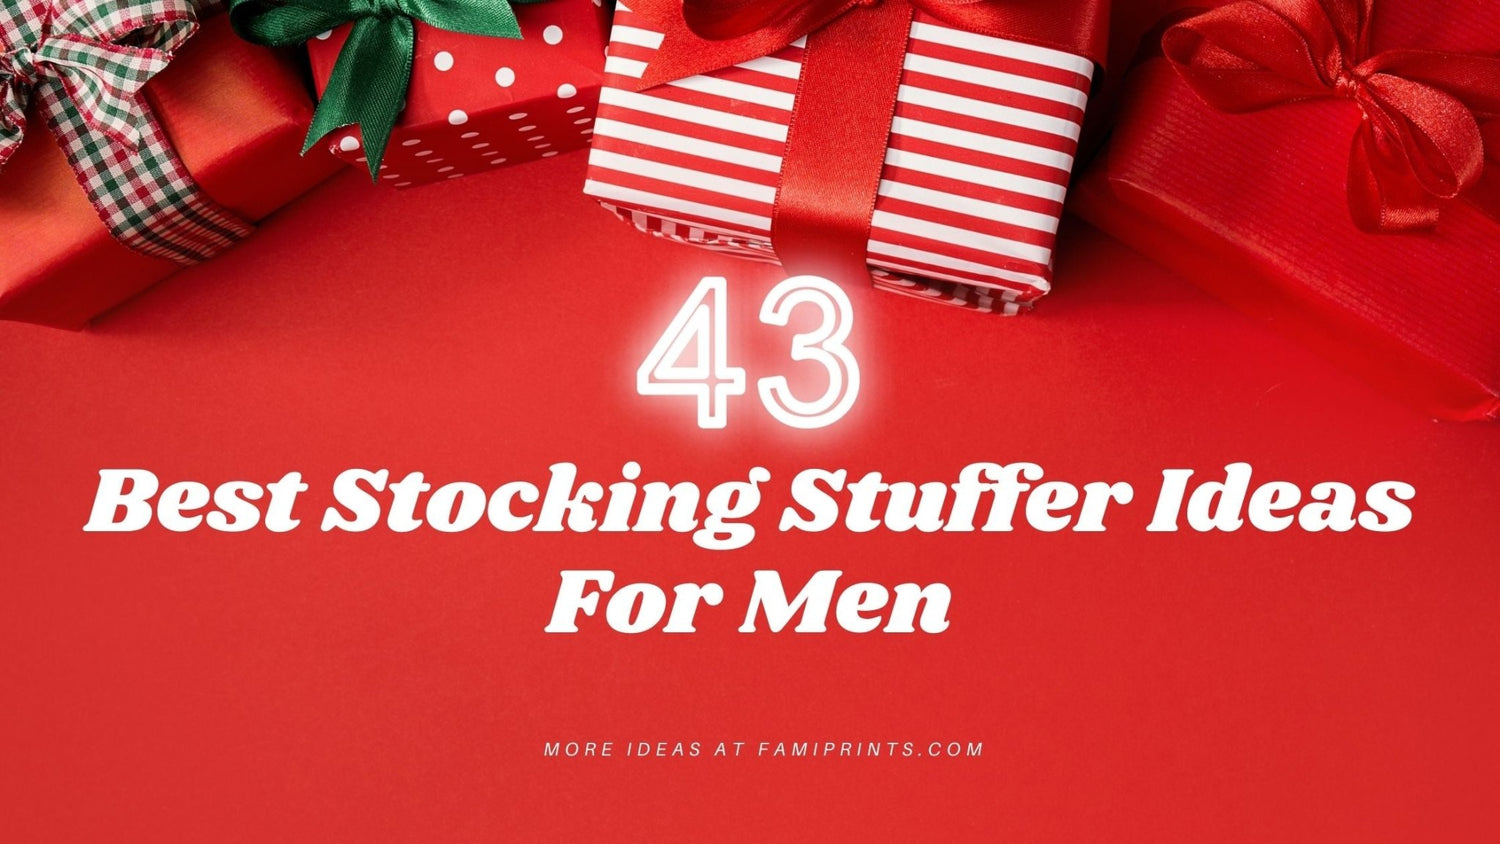 55 Cheap Stocking Stuffers Under $5 for the Entire Family